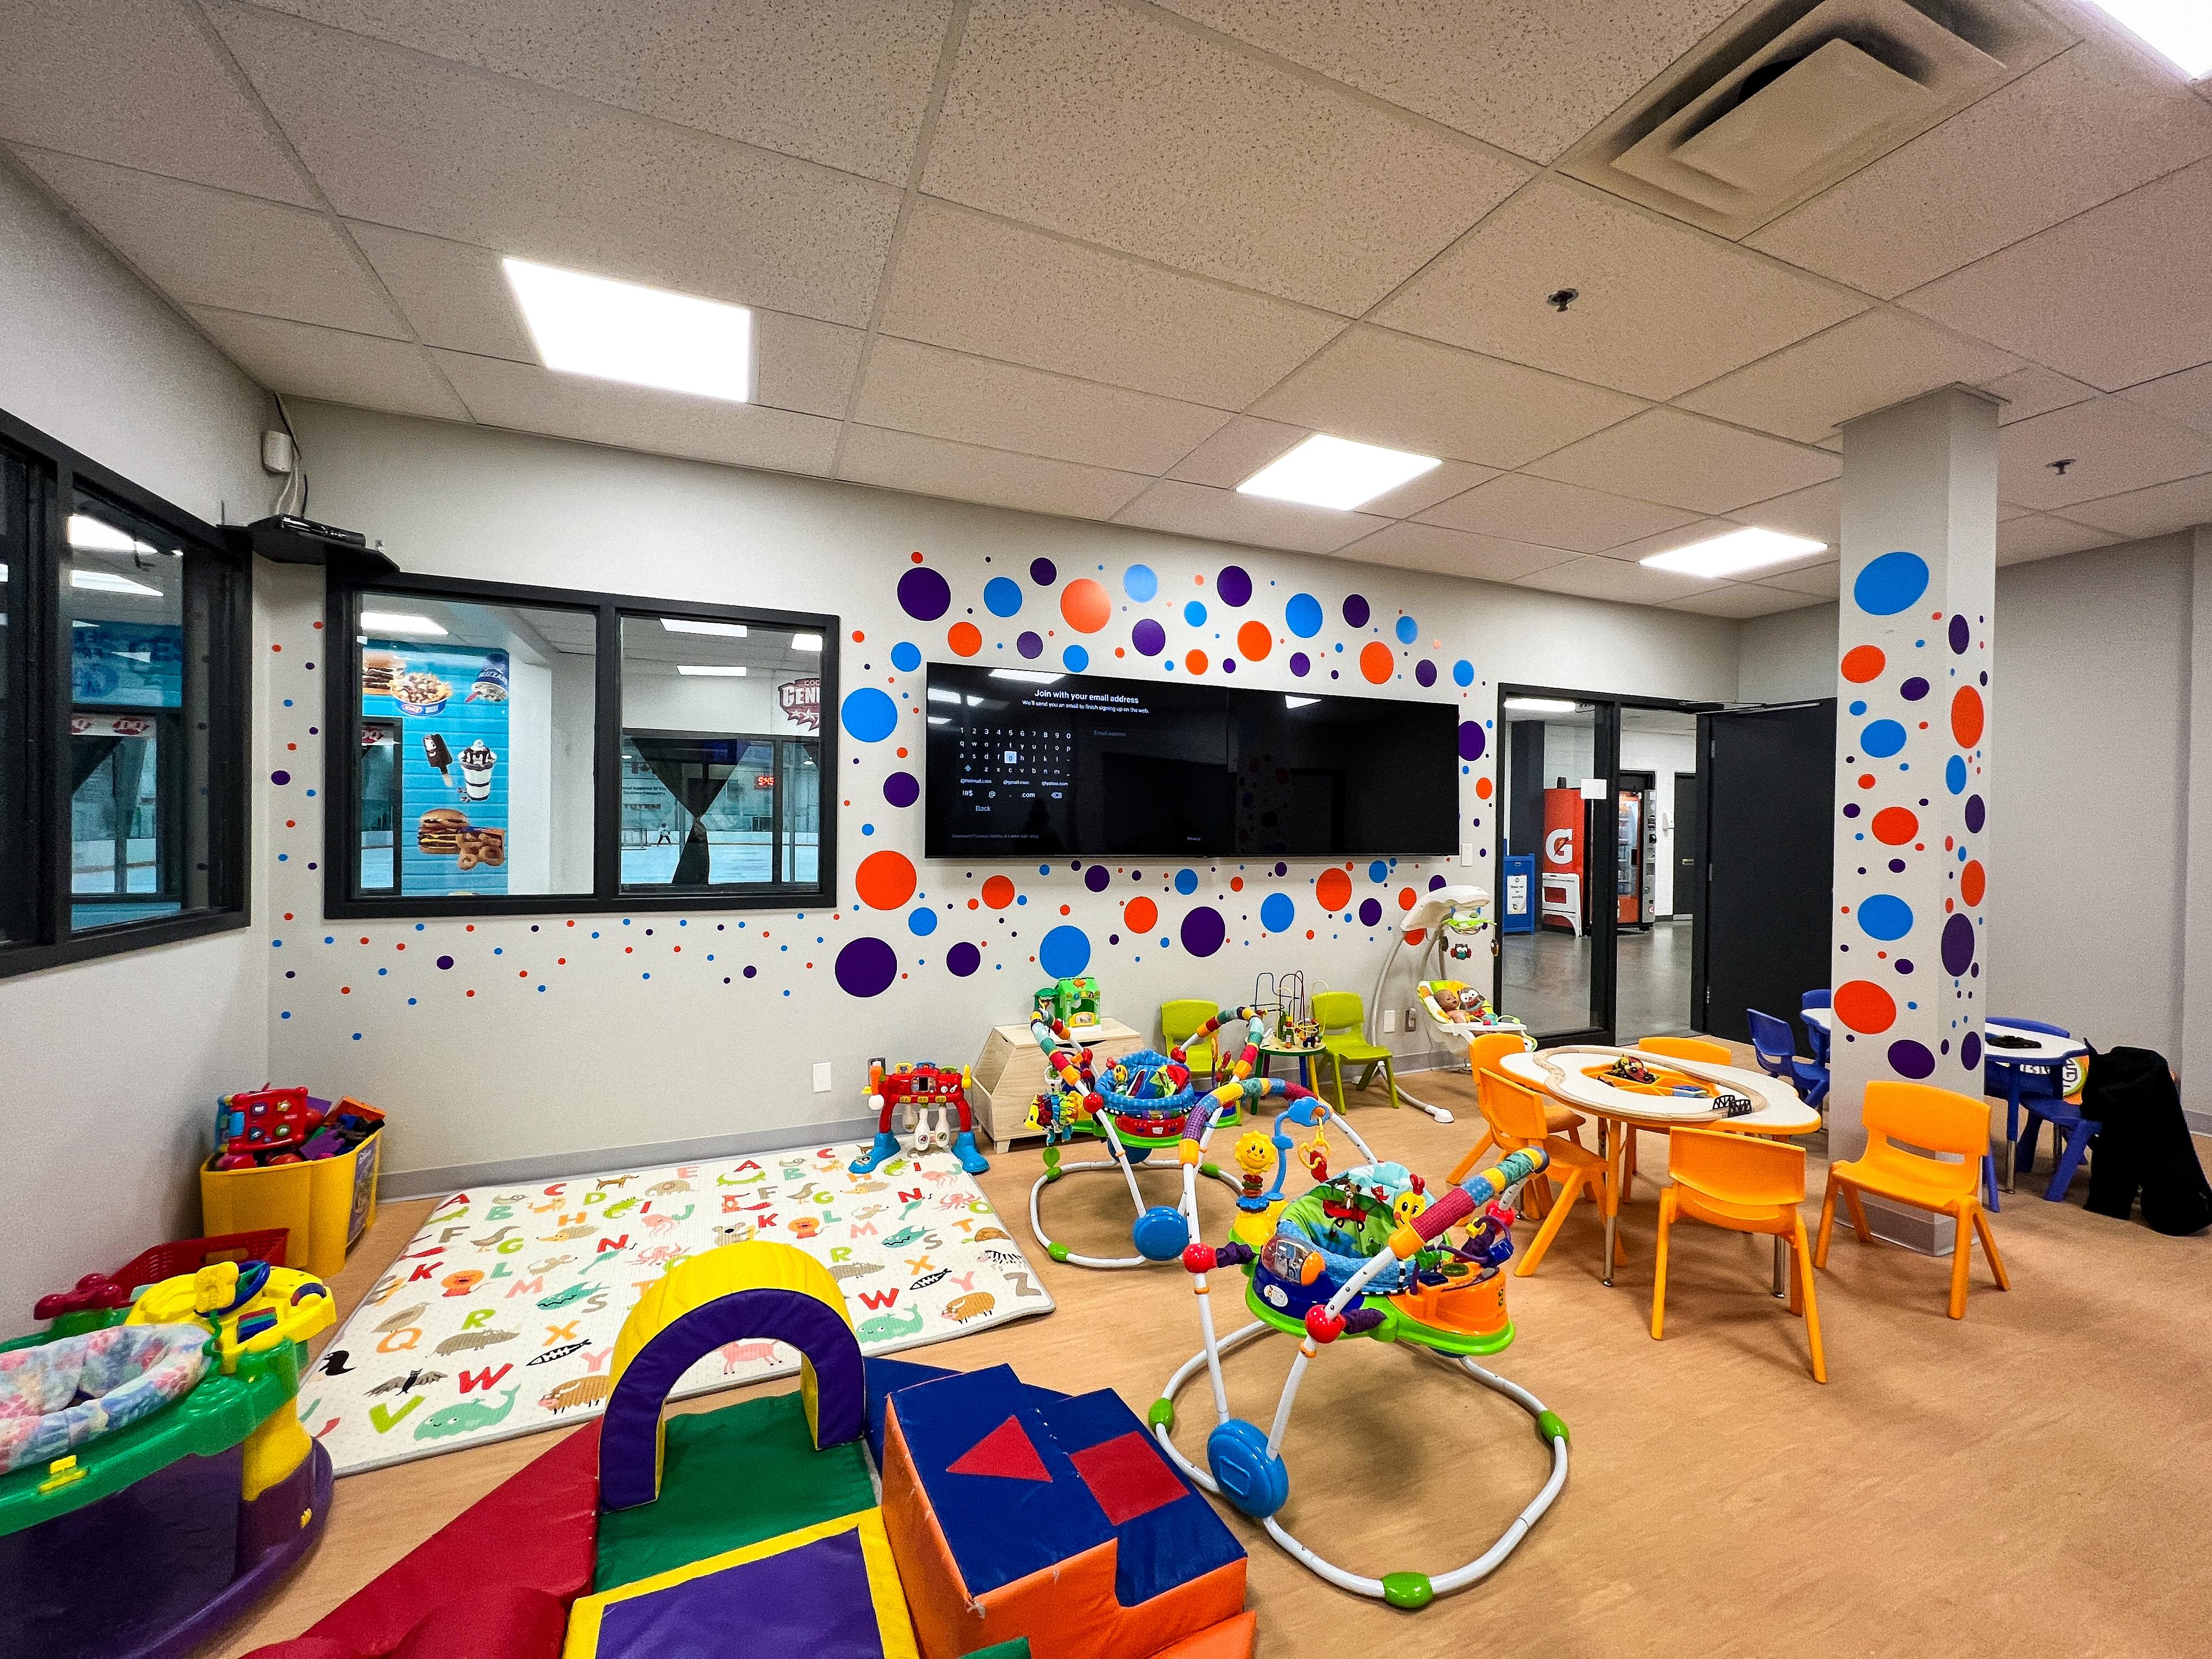 A Play care room with toys and kid size tables and chairs with 2 TVs and circle stickers on the wall.